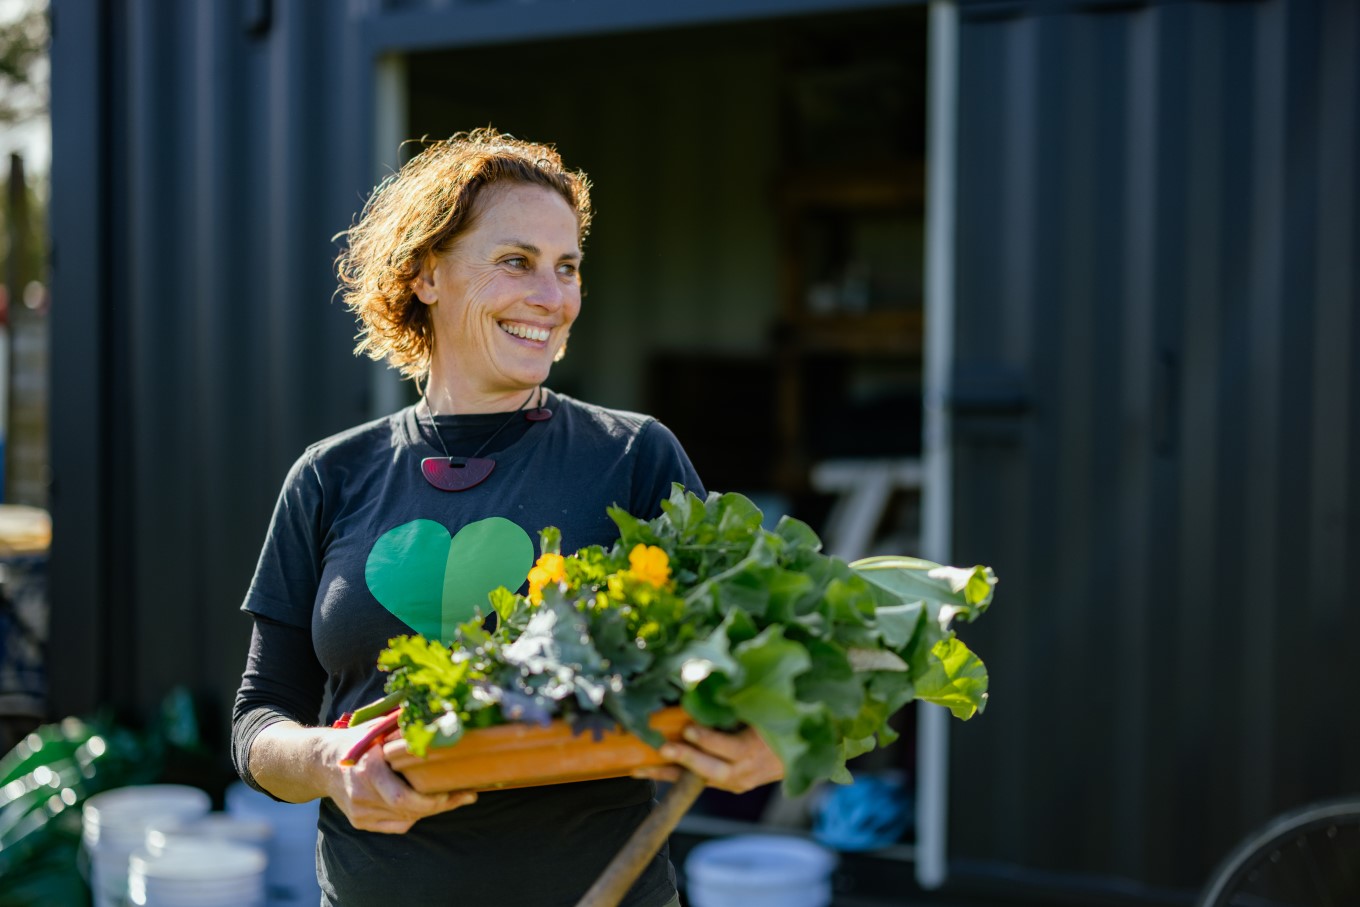 Hope Teaching Garden Coordinator Amanda Hookham-Kraft says that the process of growing, harvesting and eating your own kai builds a deeper appreciation of where food comes from and helps reduce food waste.